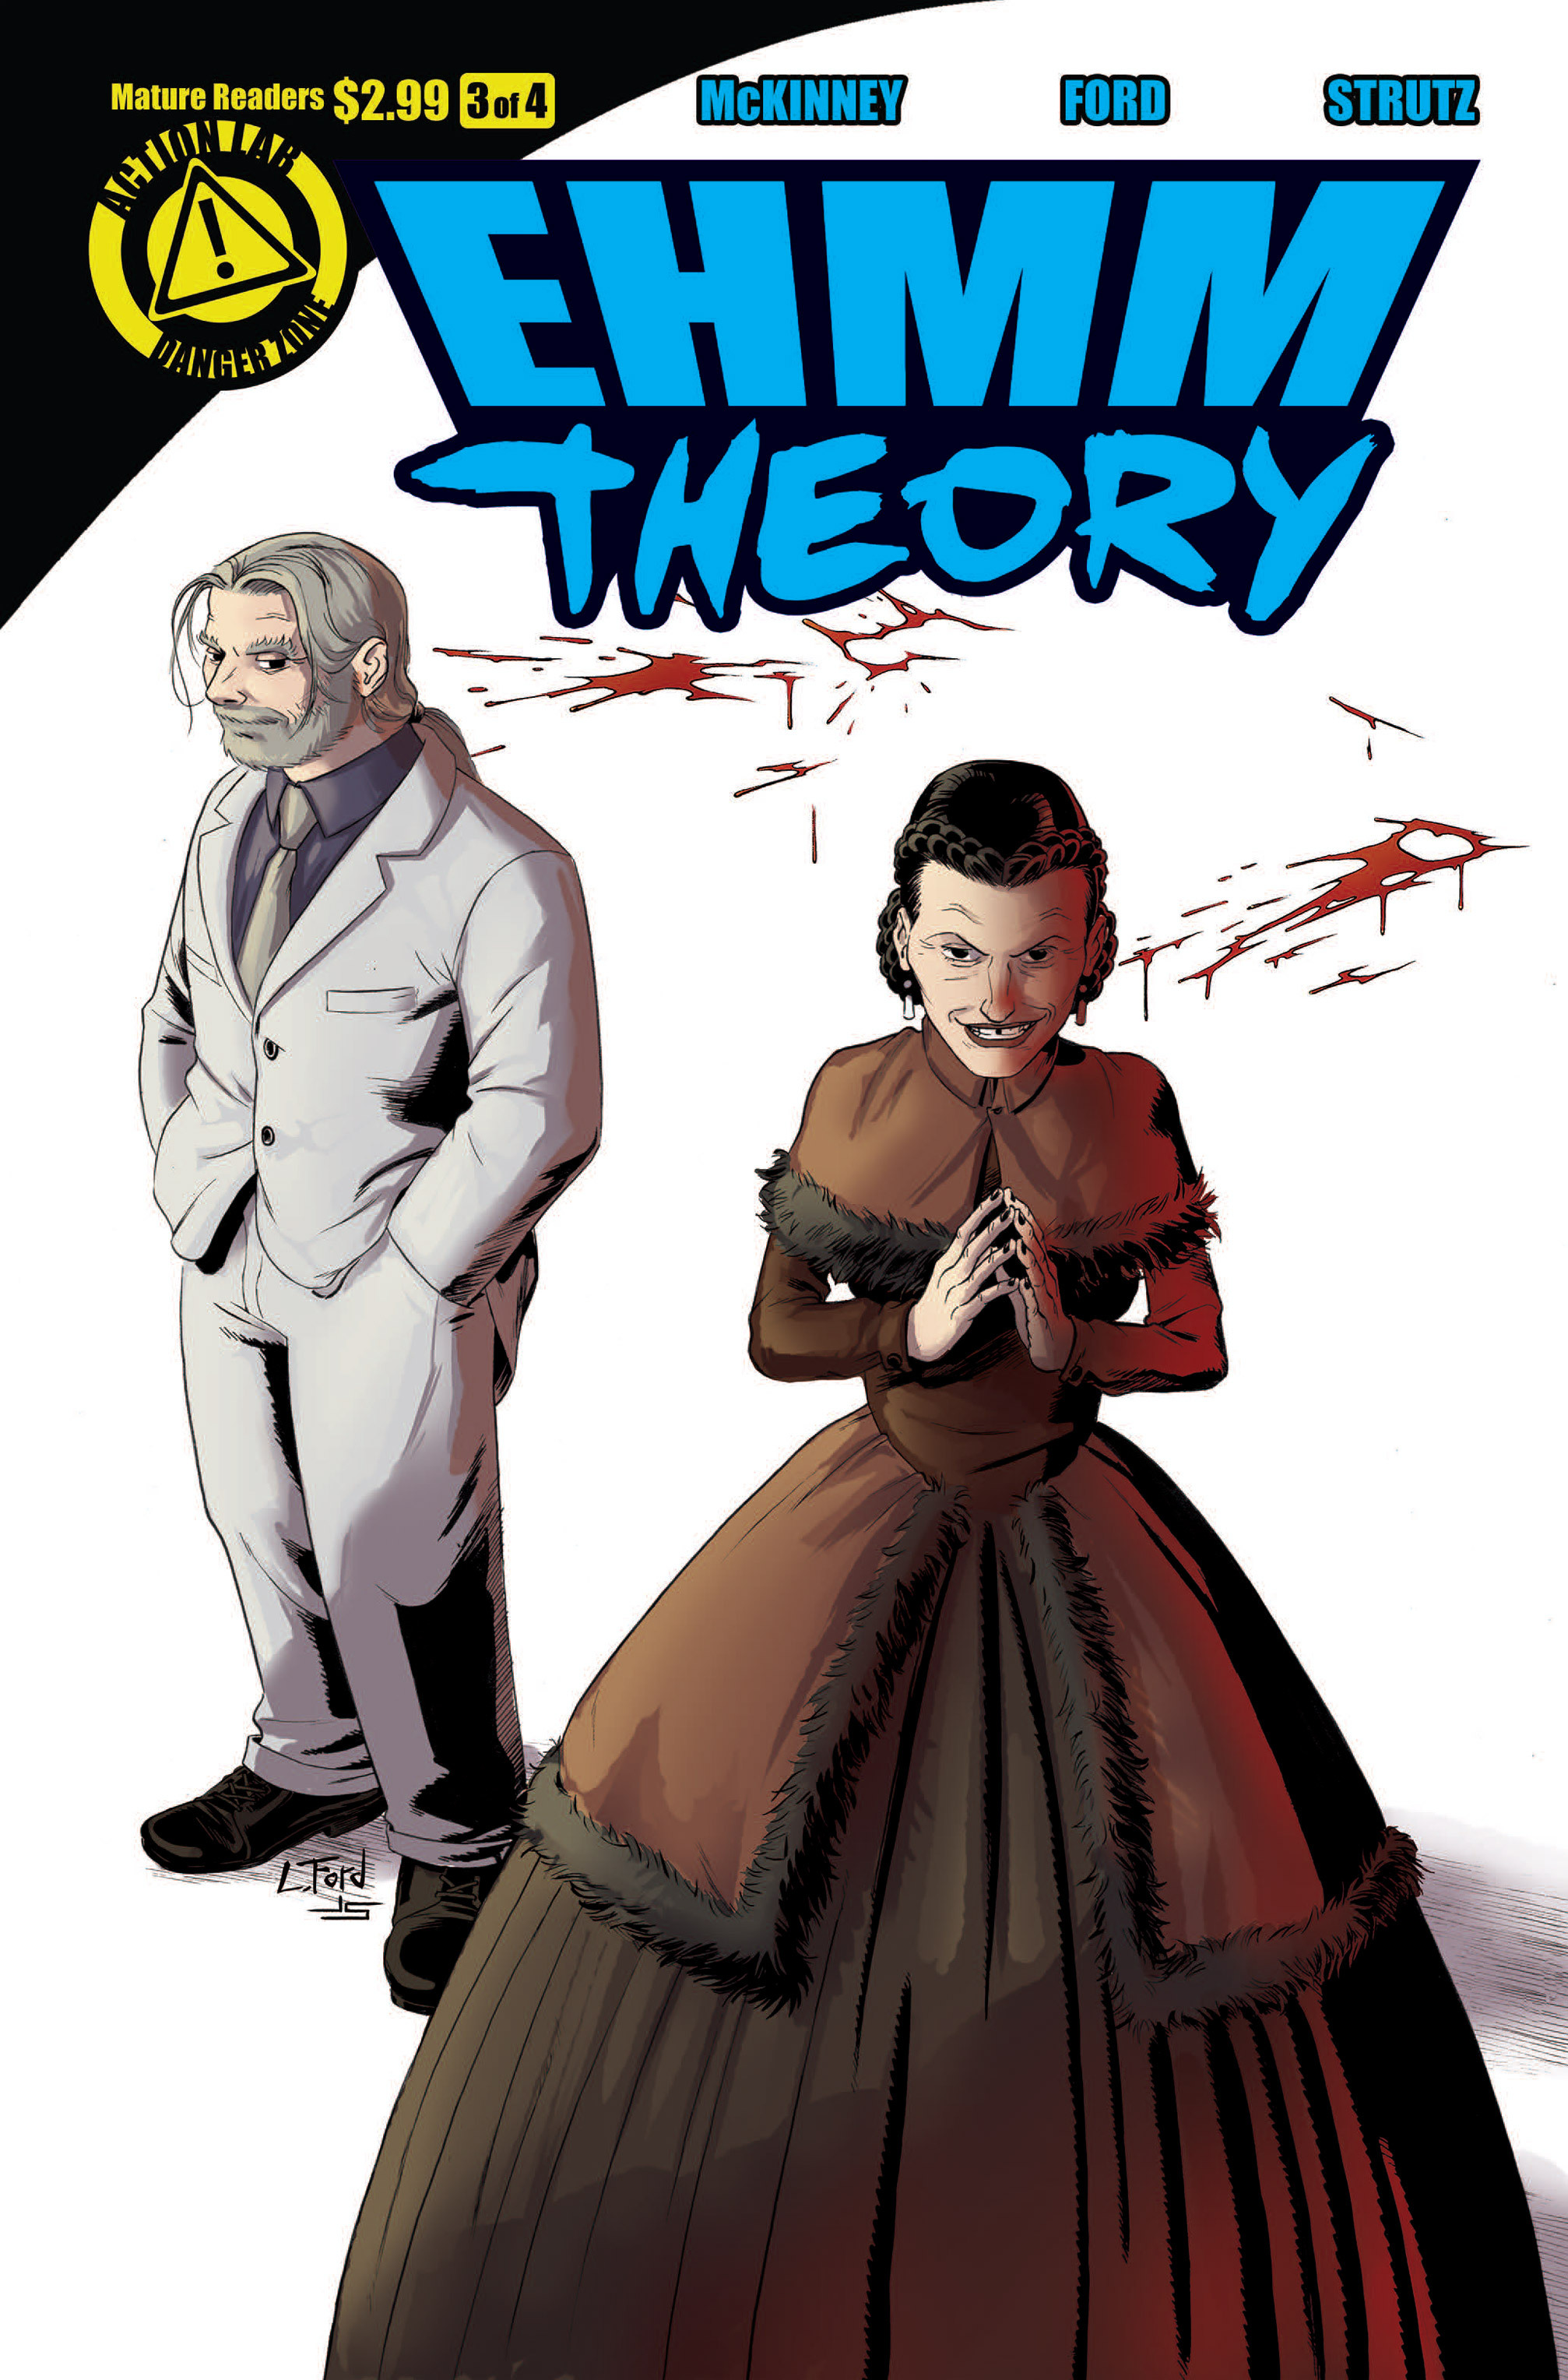 Read online Ehmm Theory comic -  Issue #3 - 1